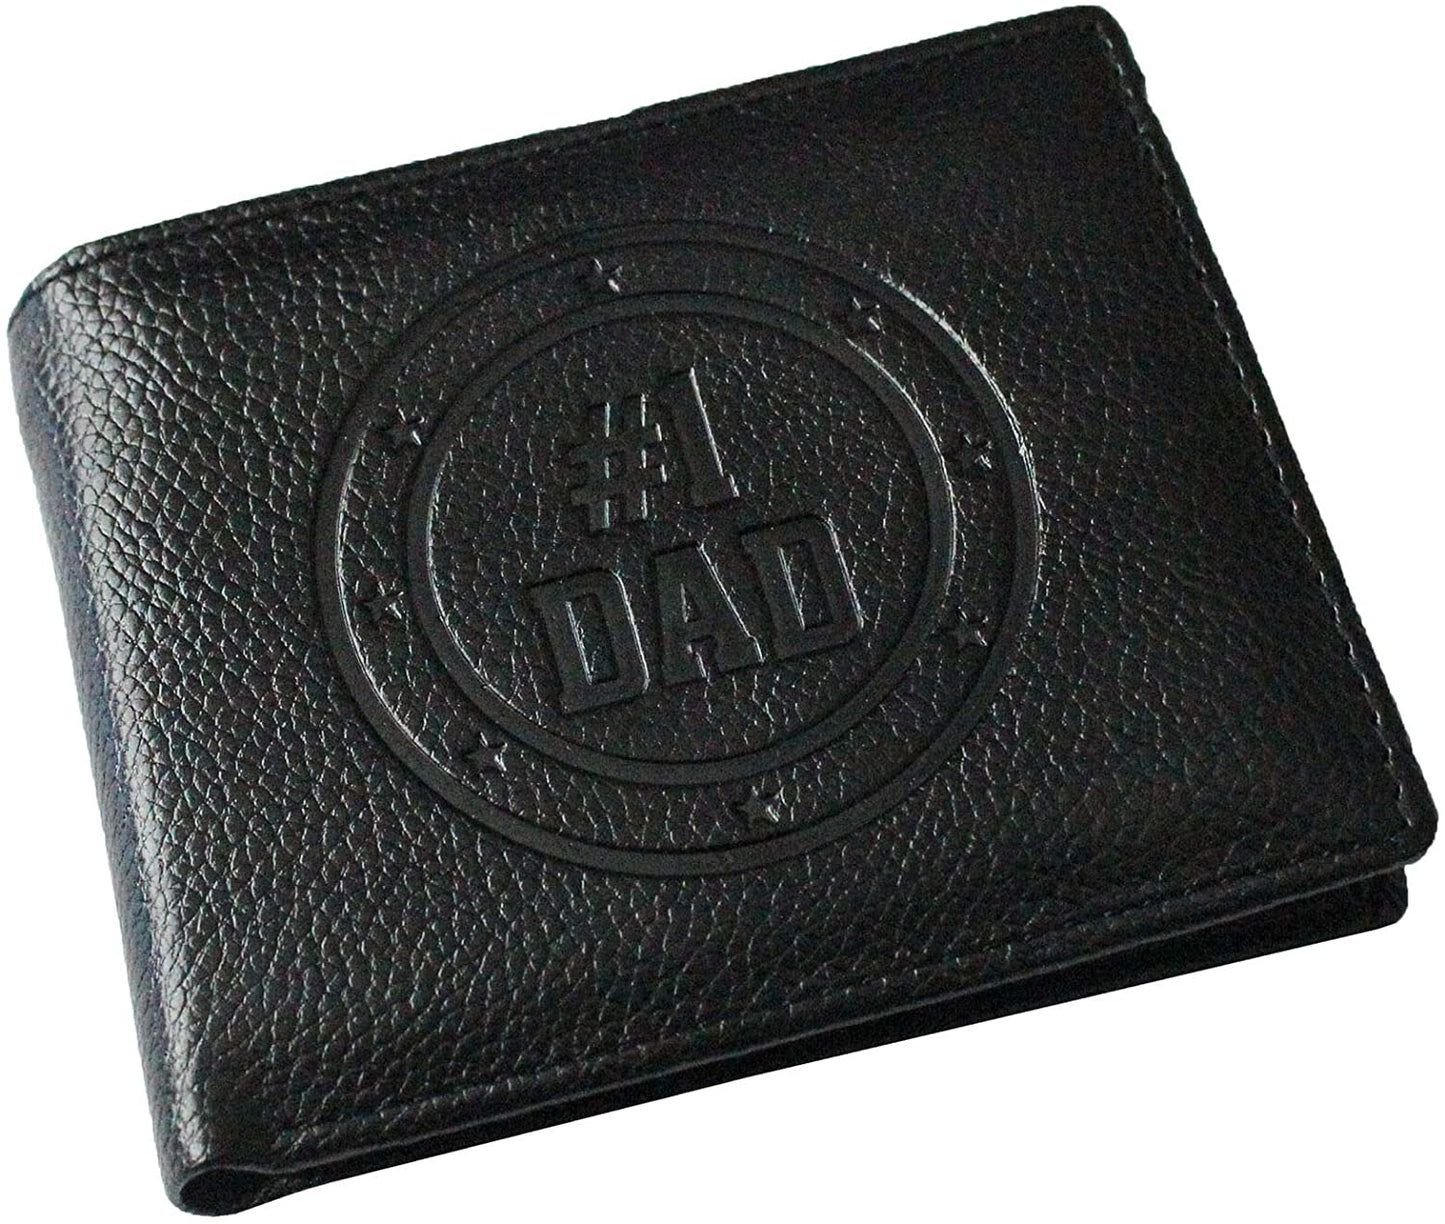 Dad Leather Wallet Embossed - Classic Bi-Fold Design, Stylish and Durable